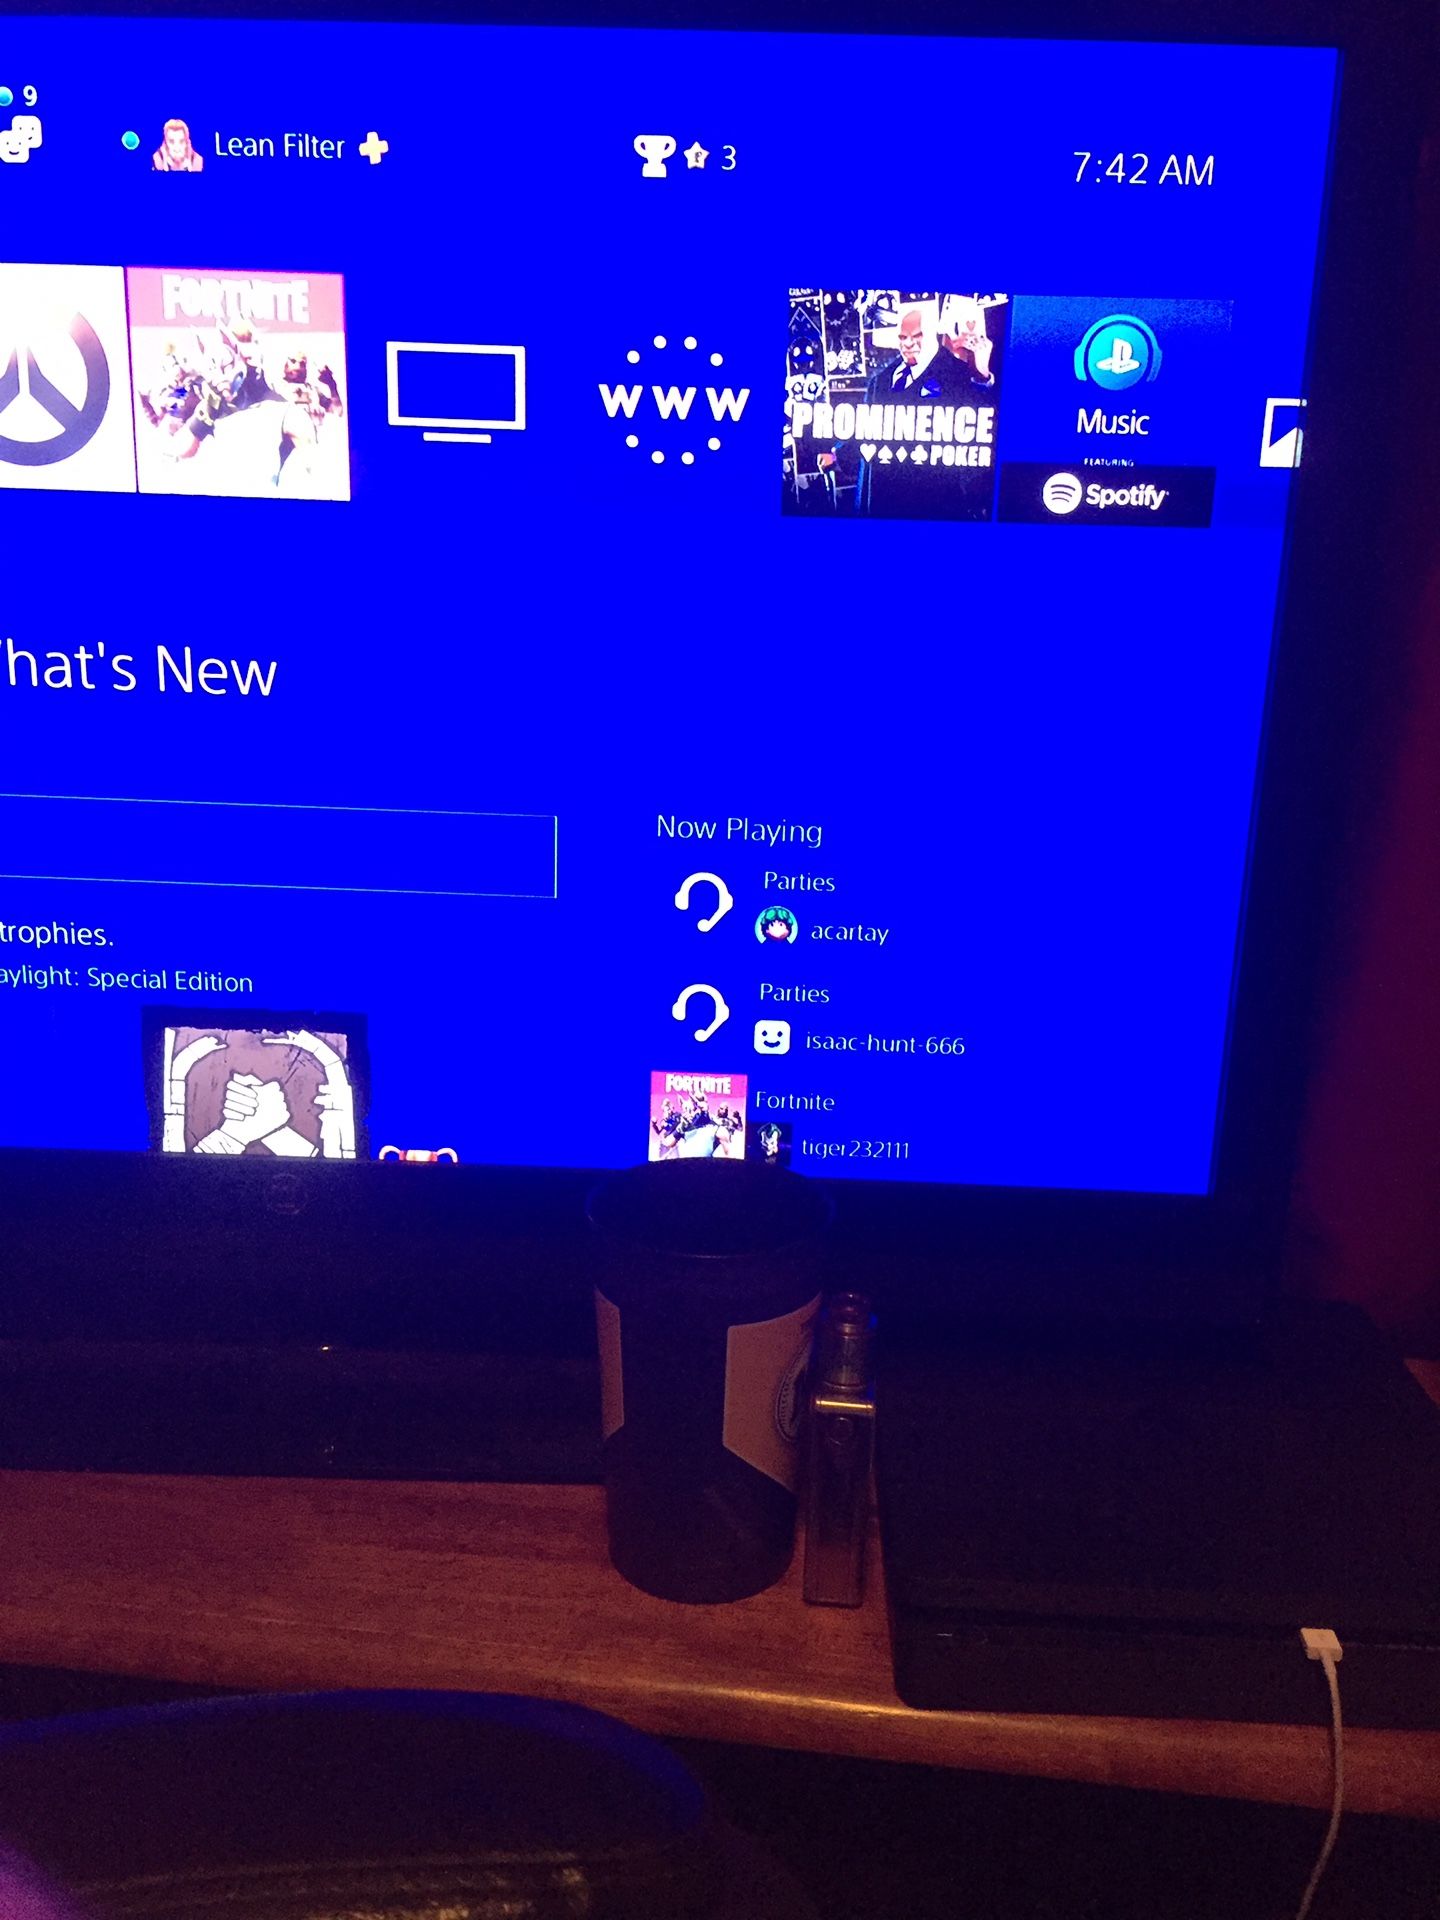 Ps4 slim 500gb, 2 controllers, overwatch, dishonored 2